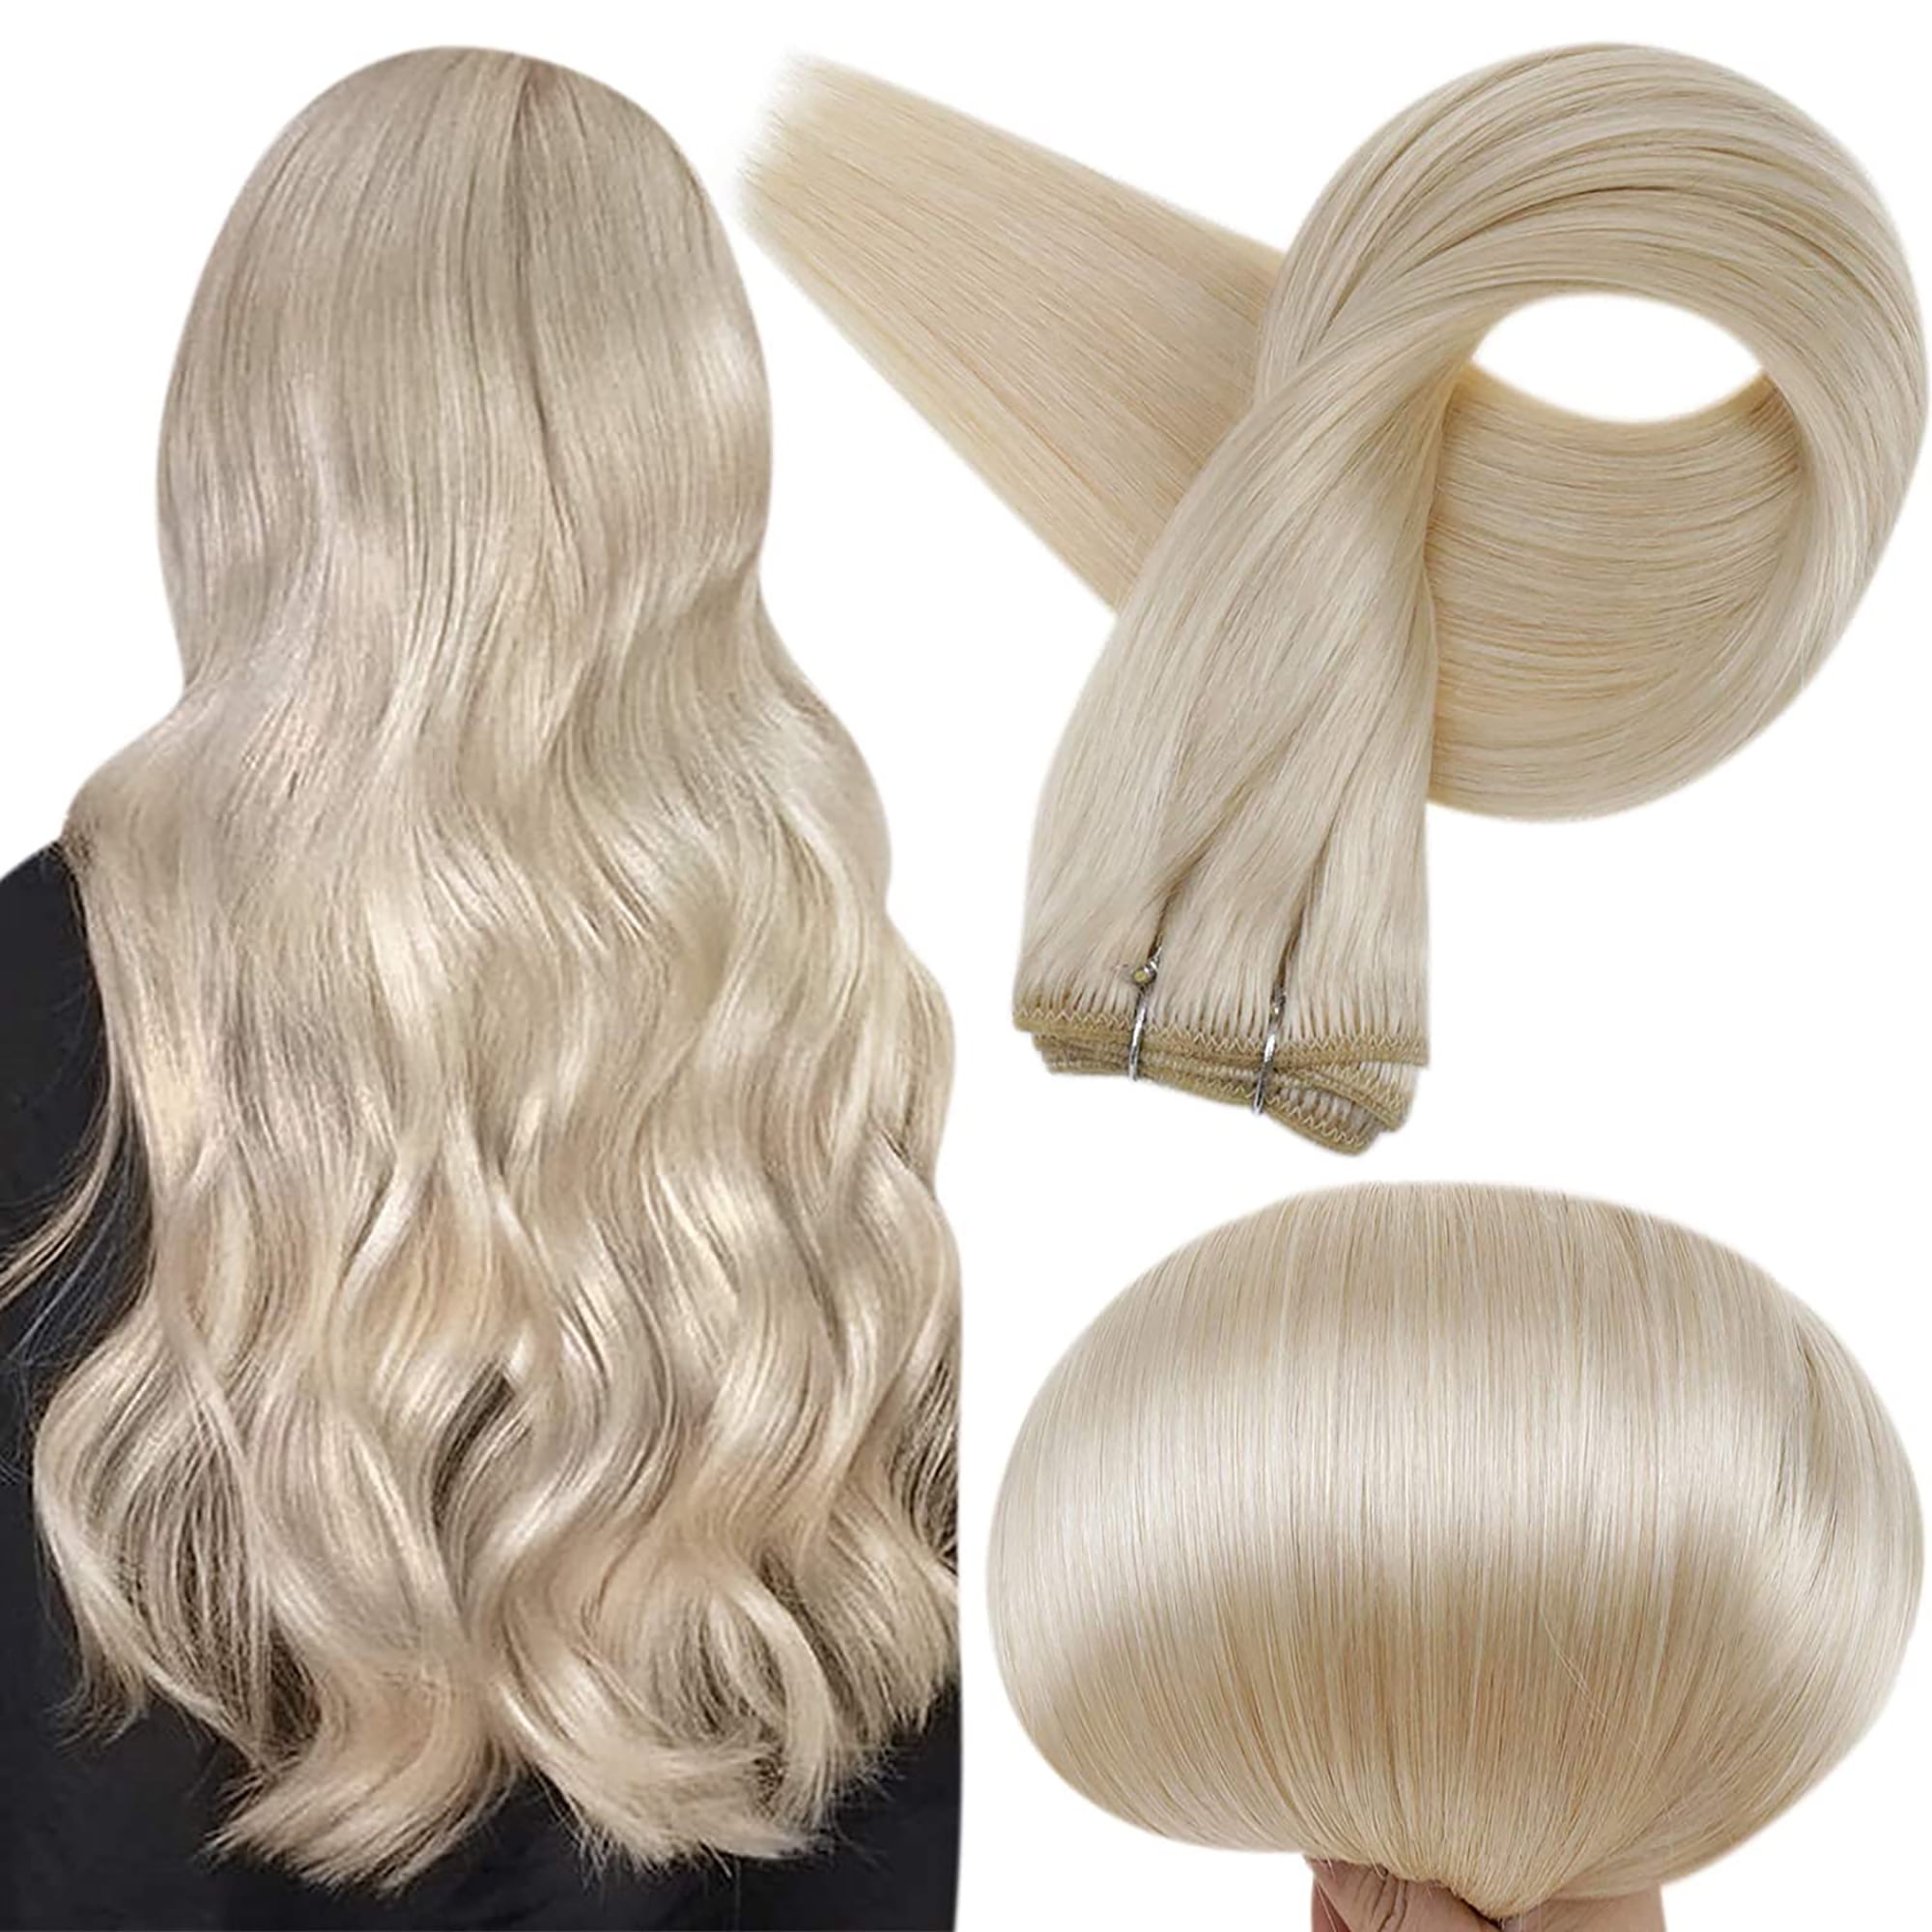 Full Shine Straight Hair Weft Platinum Blonde Sew in Hair Extensions Human Hair  Weave Extension 20 inch 100g 